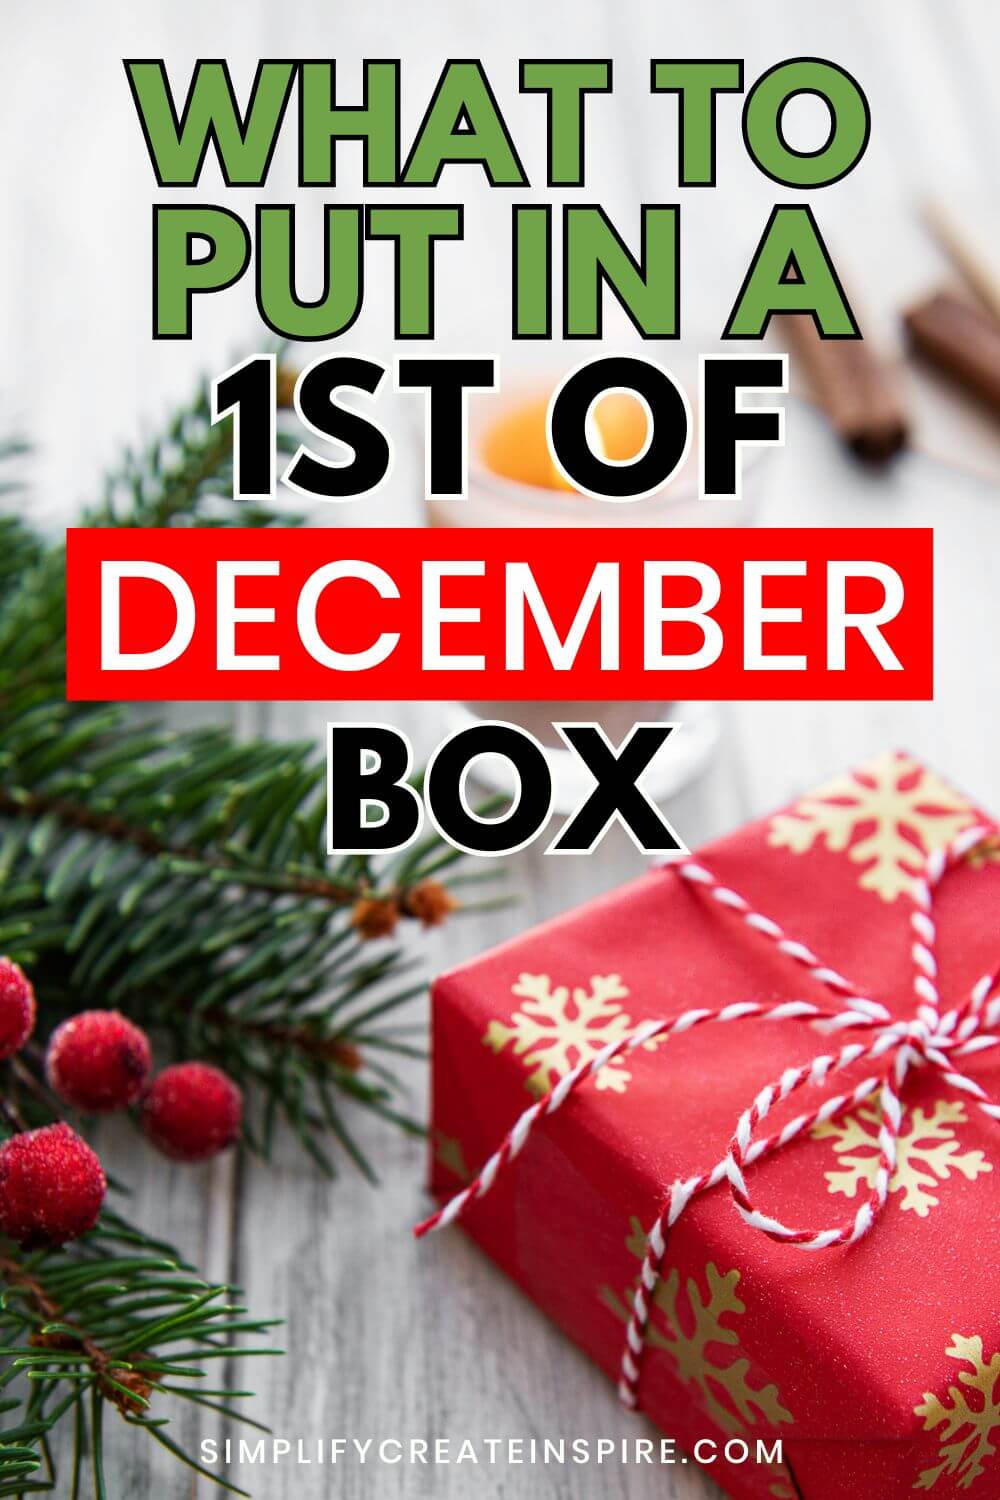 what to put in a 1st of december box ideas.